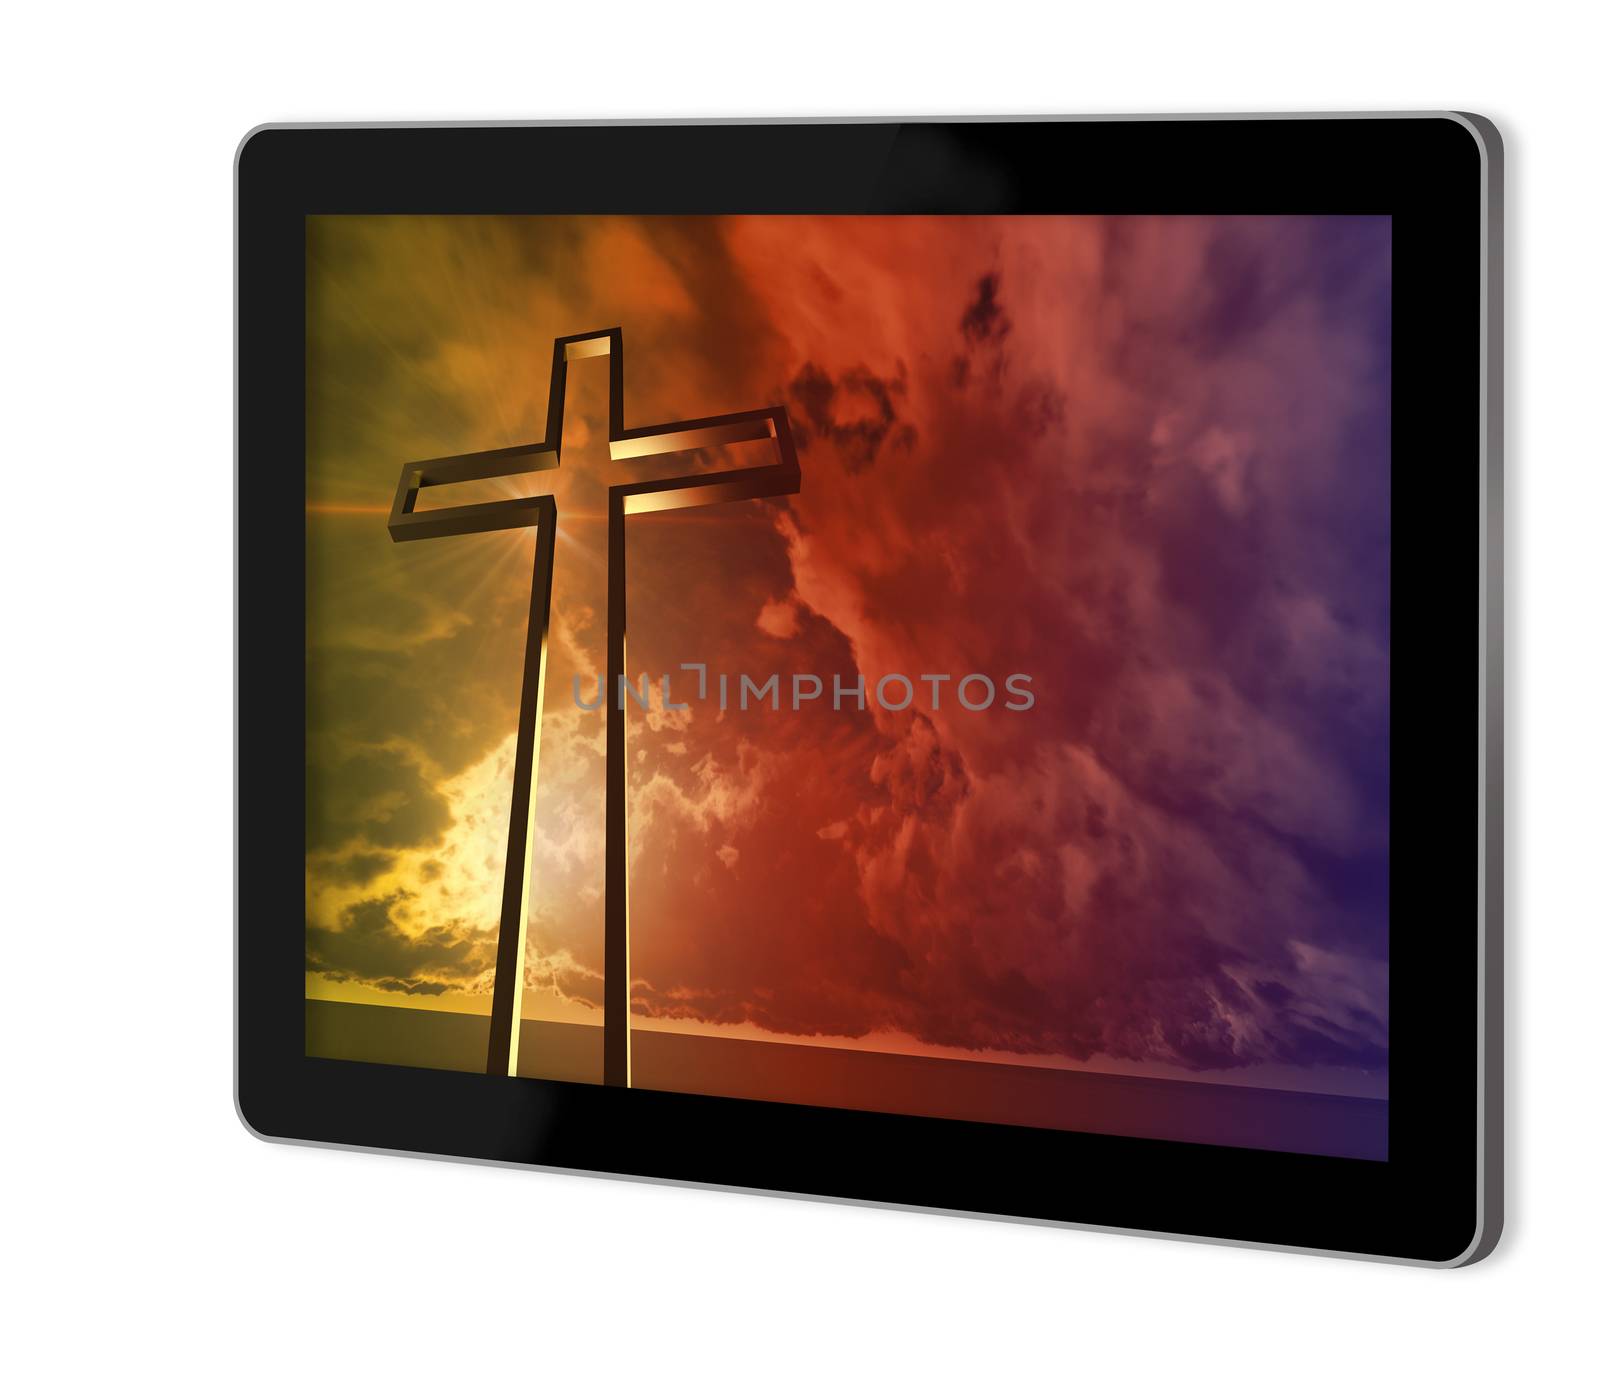 Wooden cross   on screen of tablet  made in 3d software